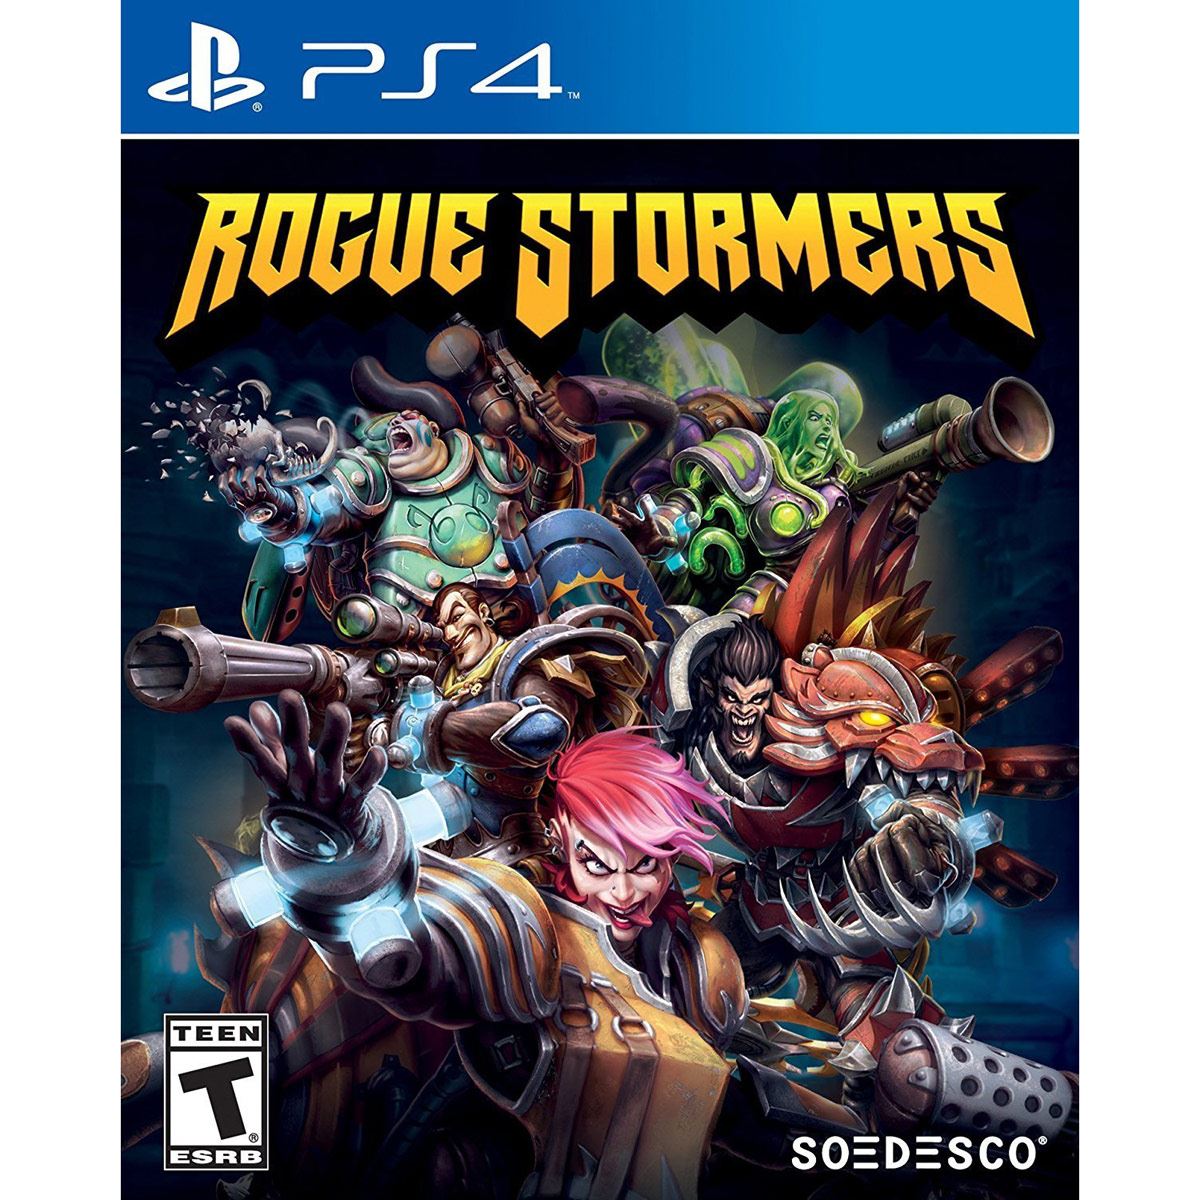 PS4-Rogue Stormers